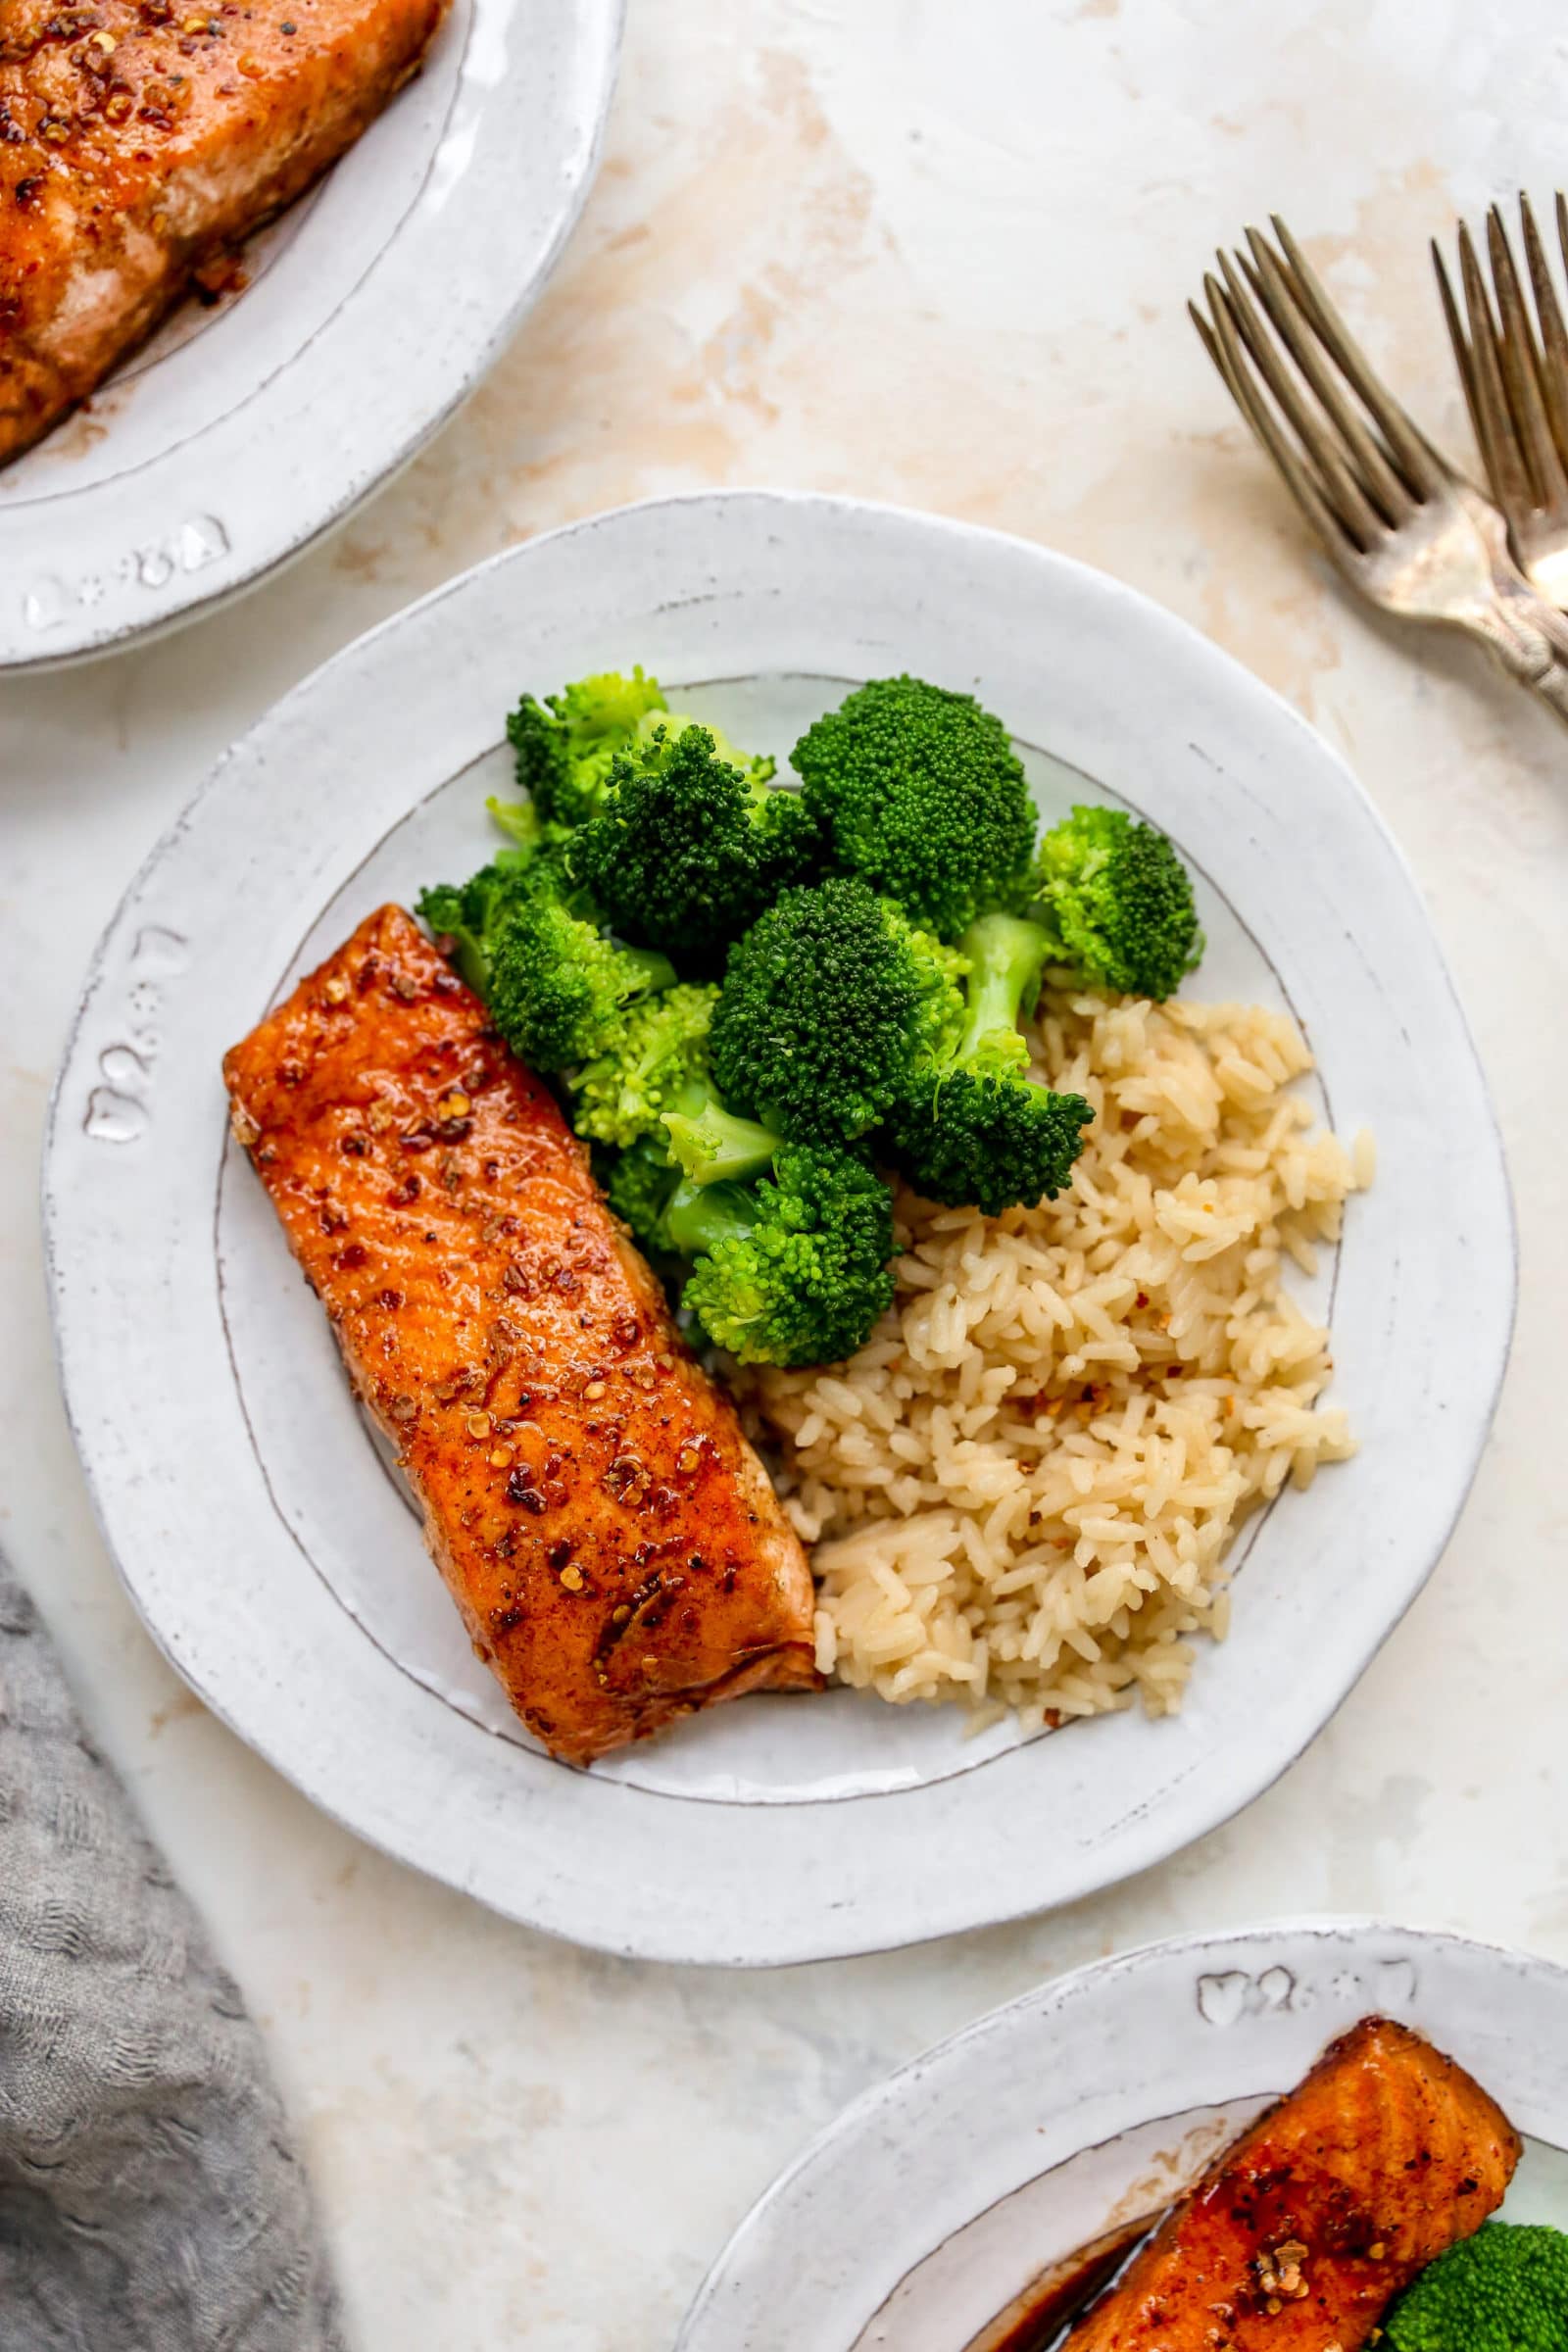 Plate with a piece of balsamic salmon, brown rice and broccoli.